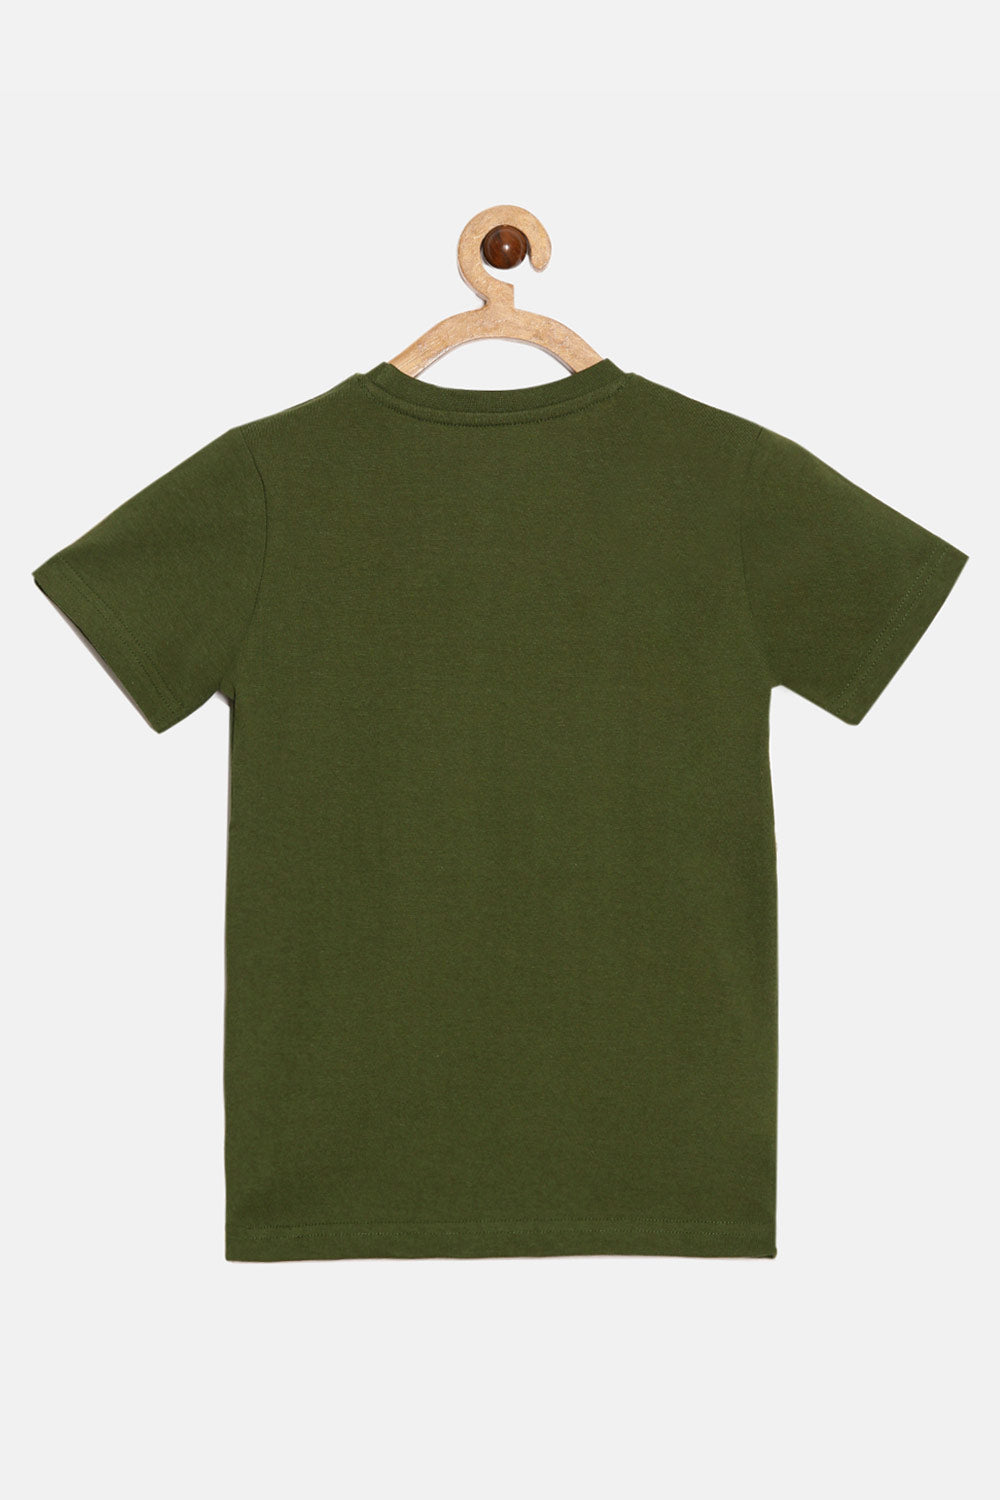 The Young Future - Boys T-shirt - Light Olive Green - BC09